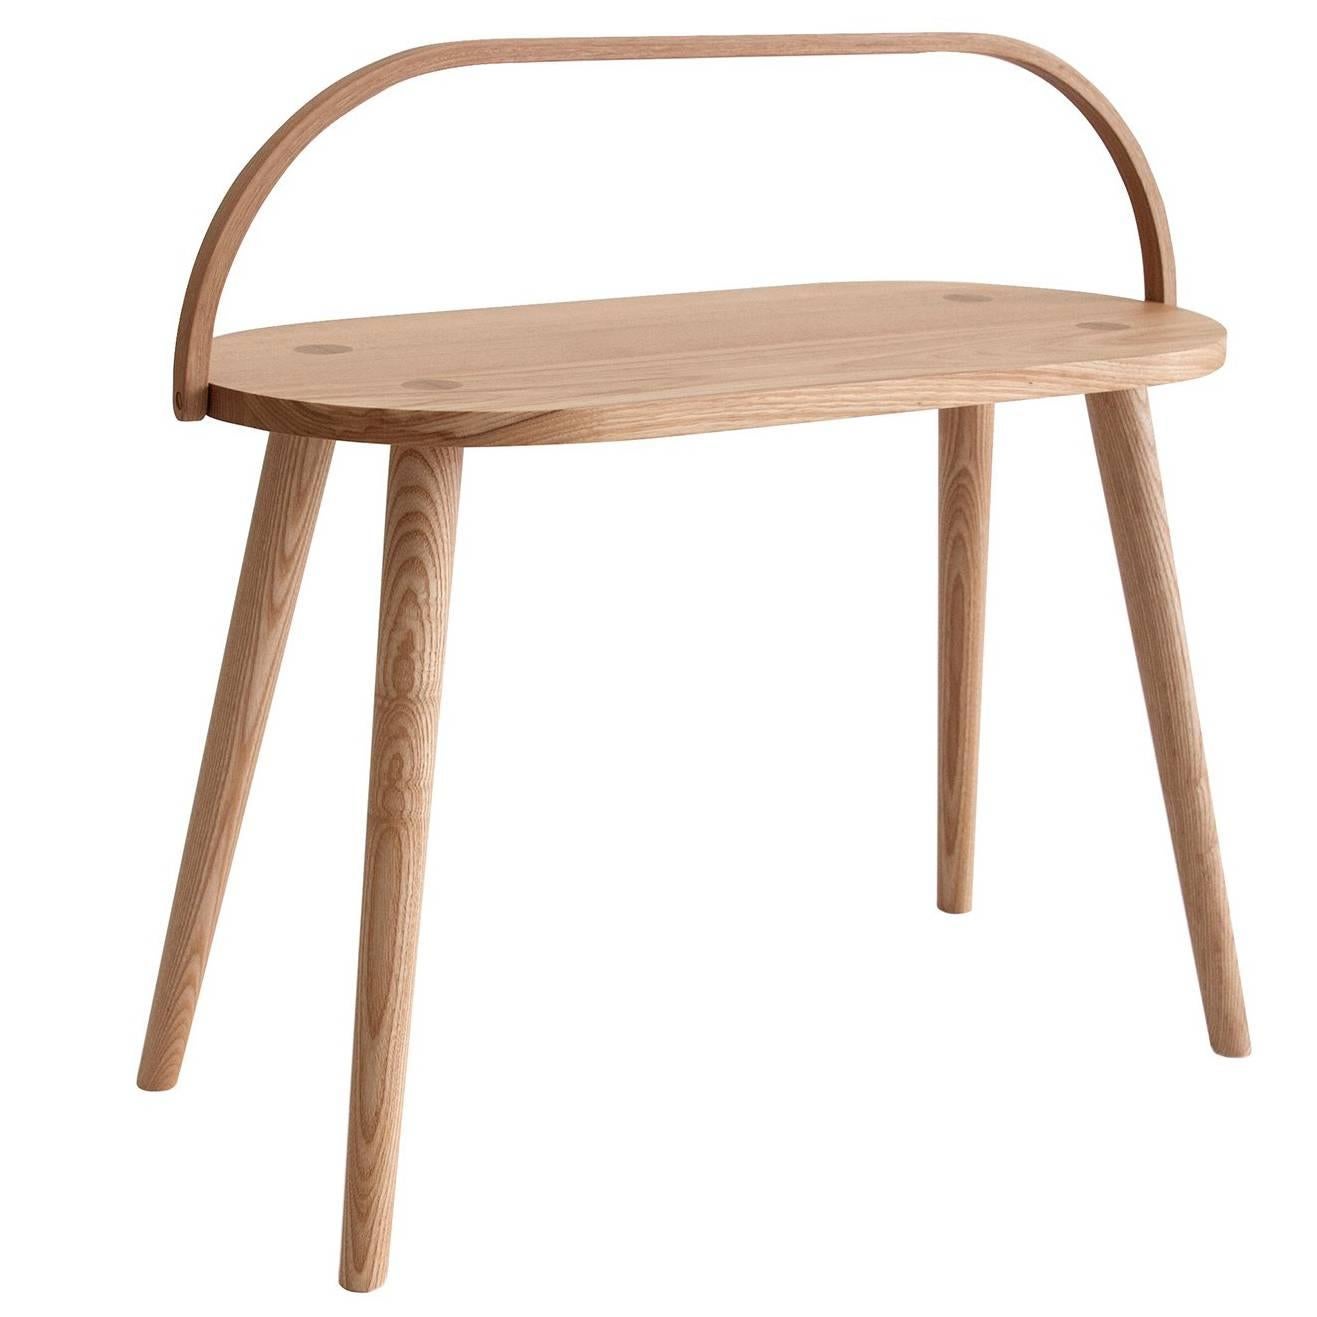 Double Bucket Stool, Wide Side Table or Seat with Bentwood Handle in Solid Ash